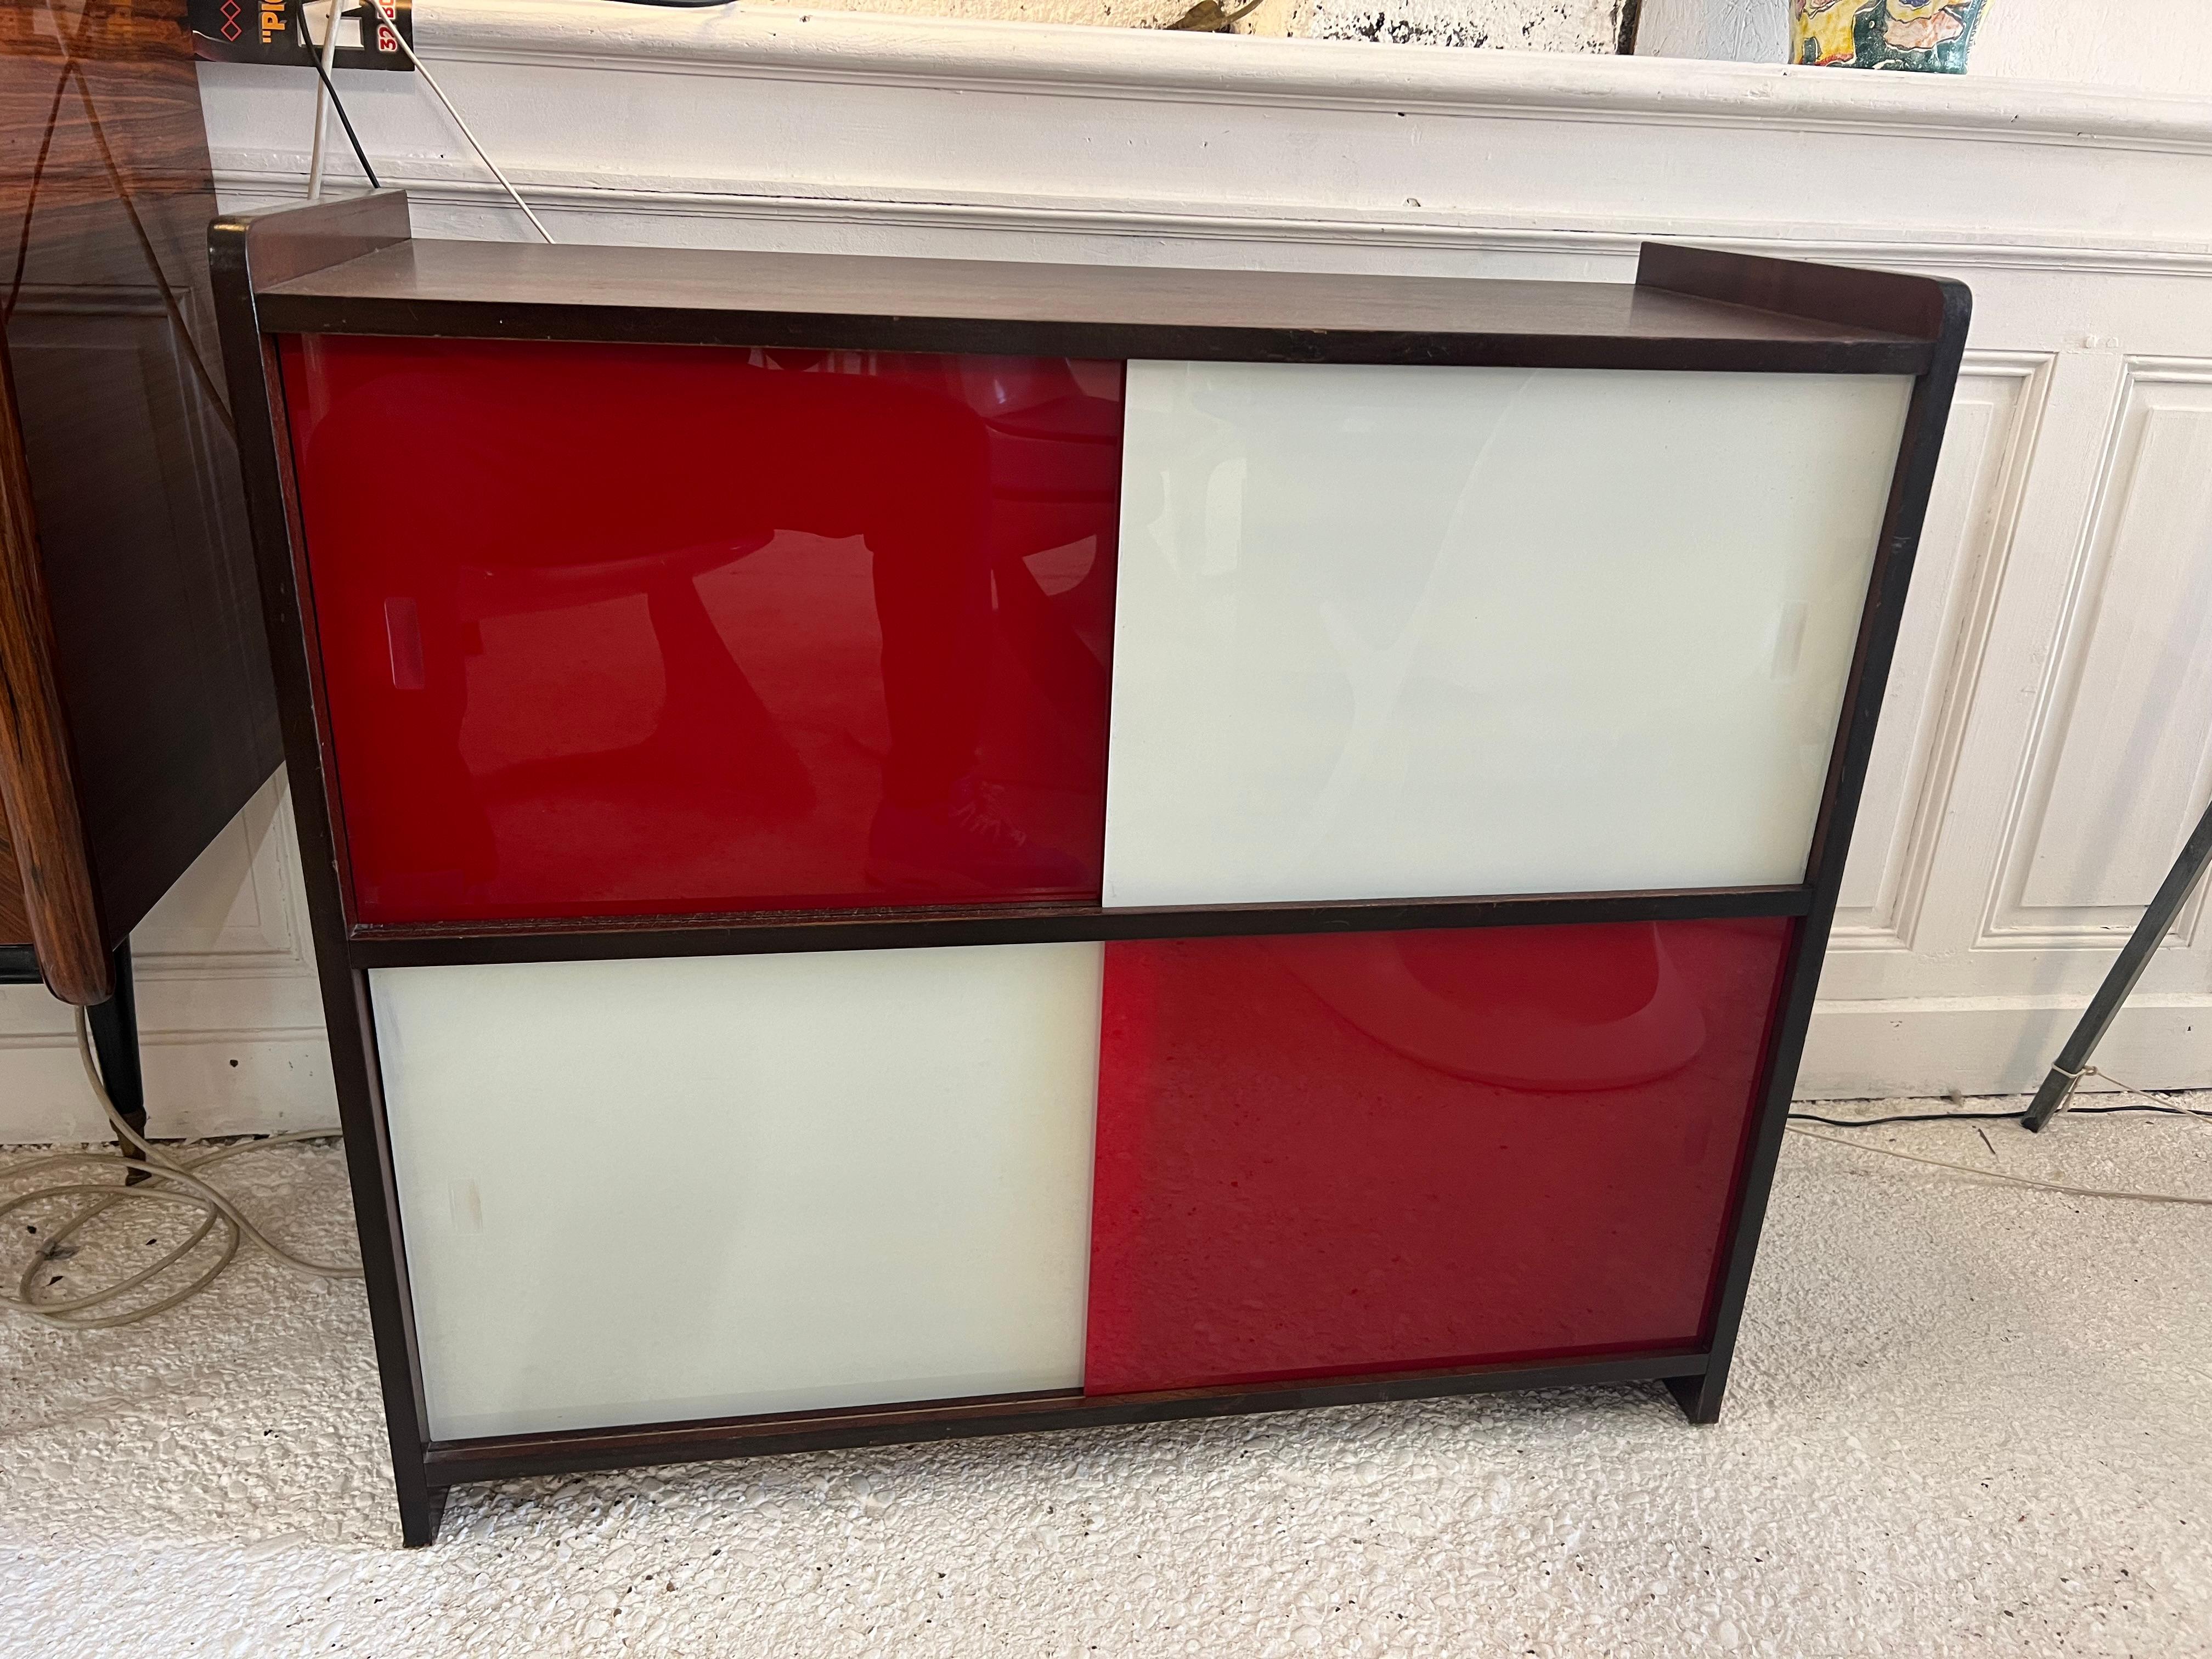 Midcentury sideboard/cabinet with 4 sliding doors red and white color
Wood structure in mahogany 
Sizes are perfect to find one space in your inside